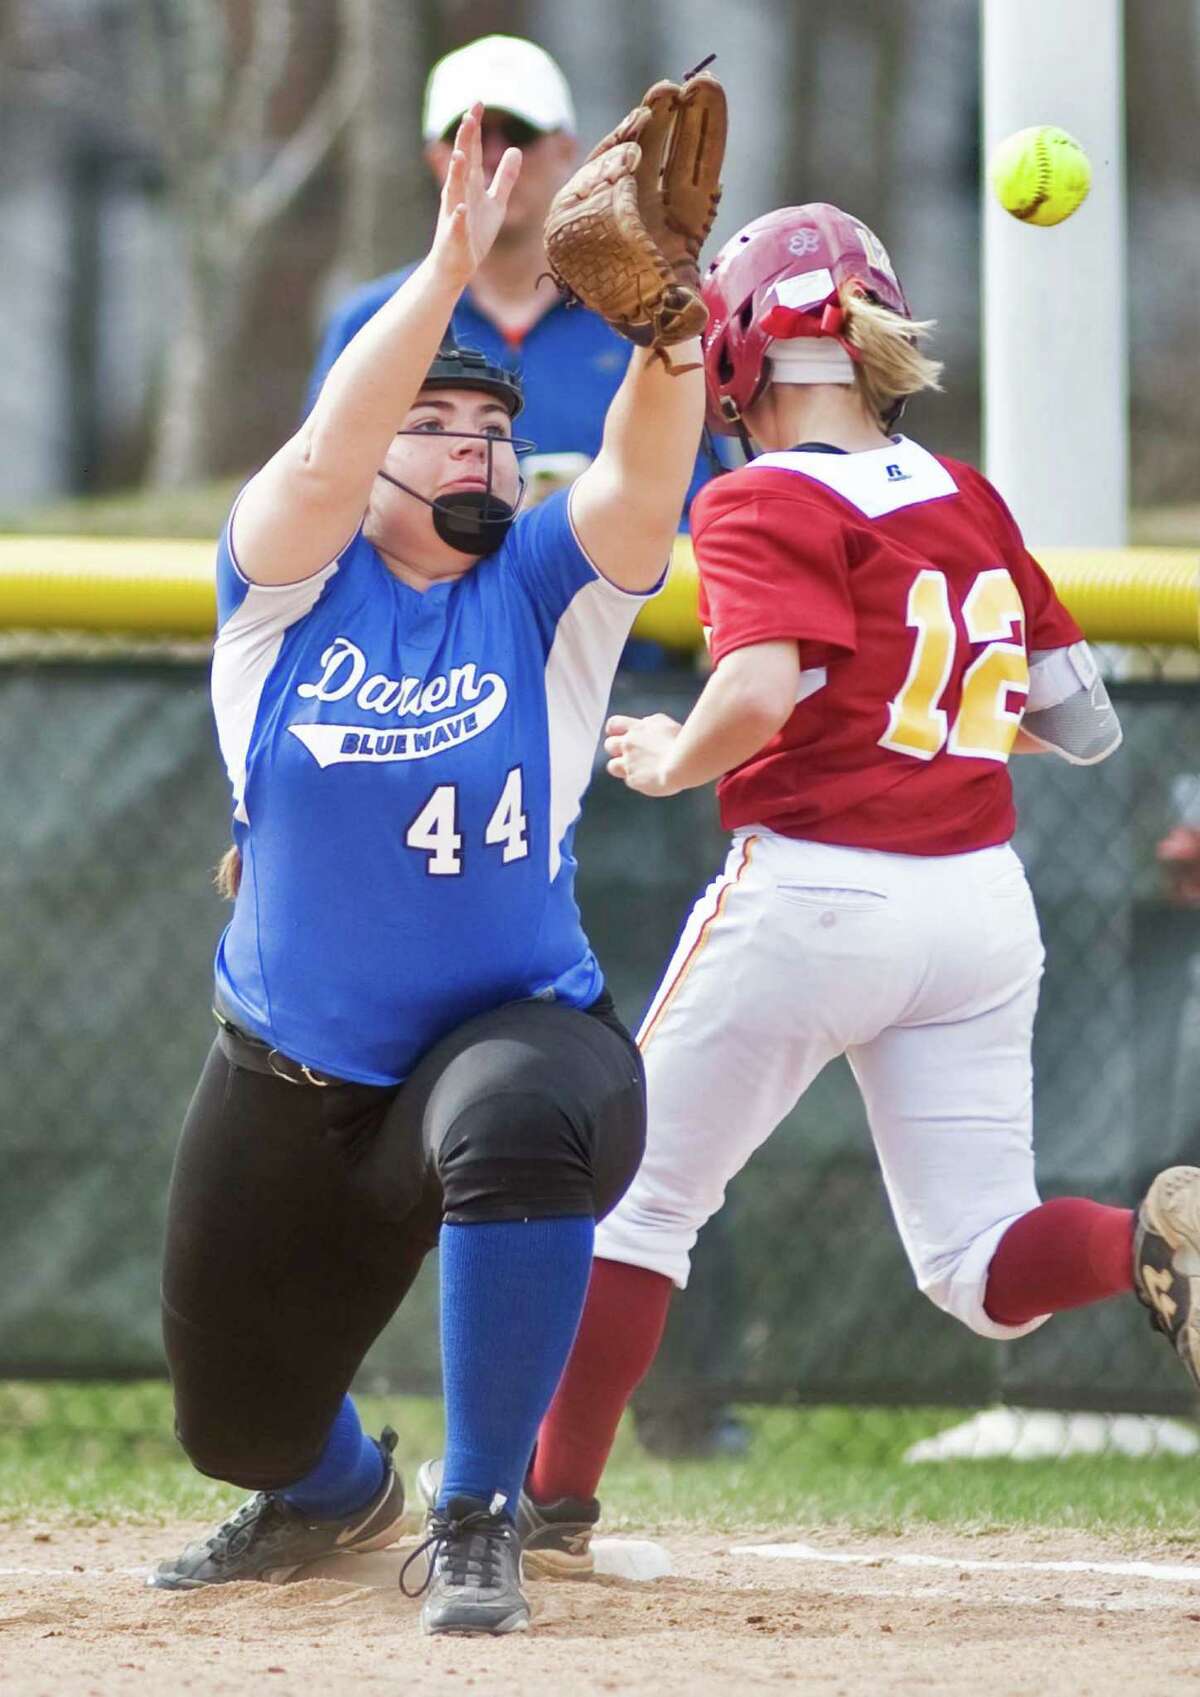 Darien High School's Sophia Barbour tries to get the out at 1st in a game against St. Joseph High School, played at Darien. Wednesday, April 15, 2015